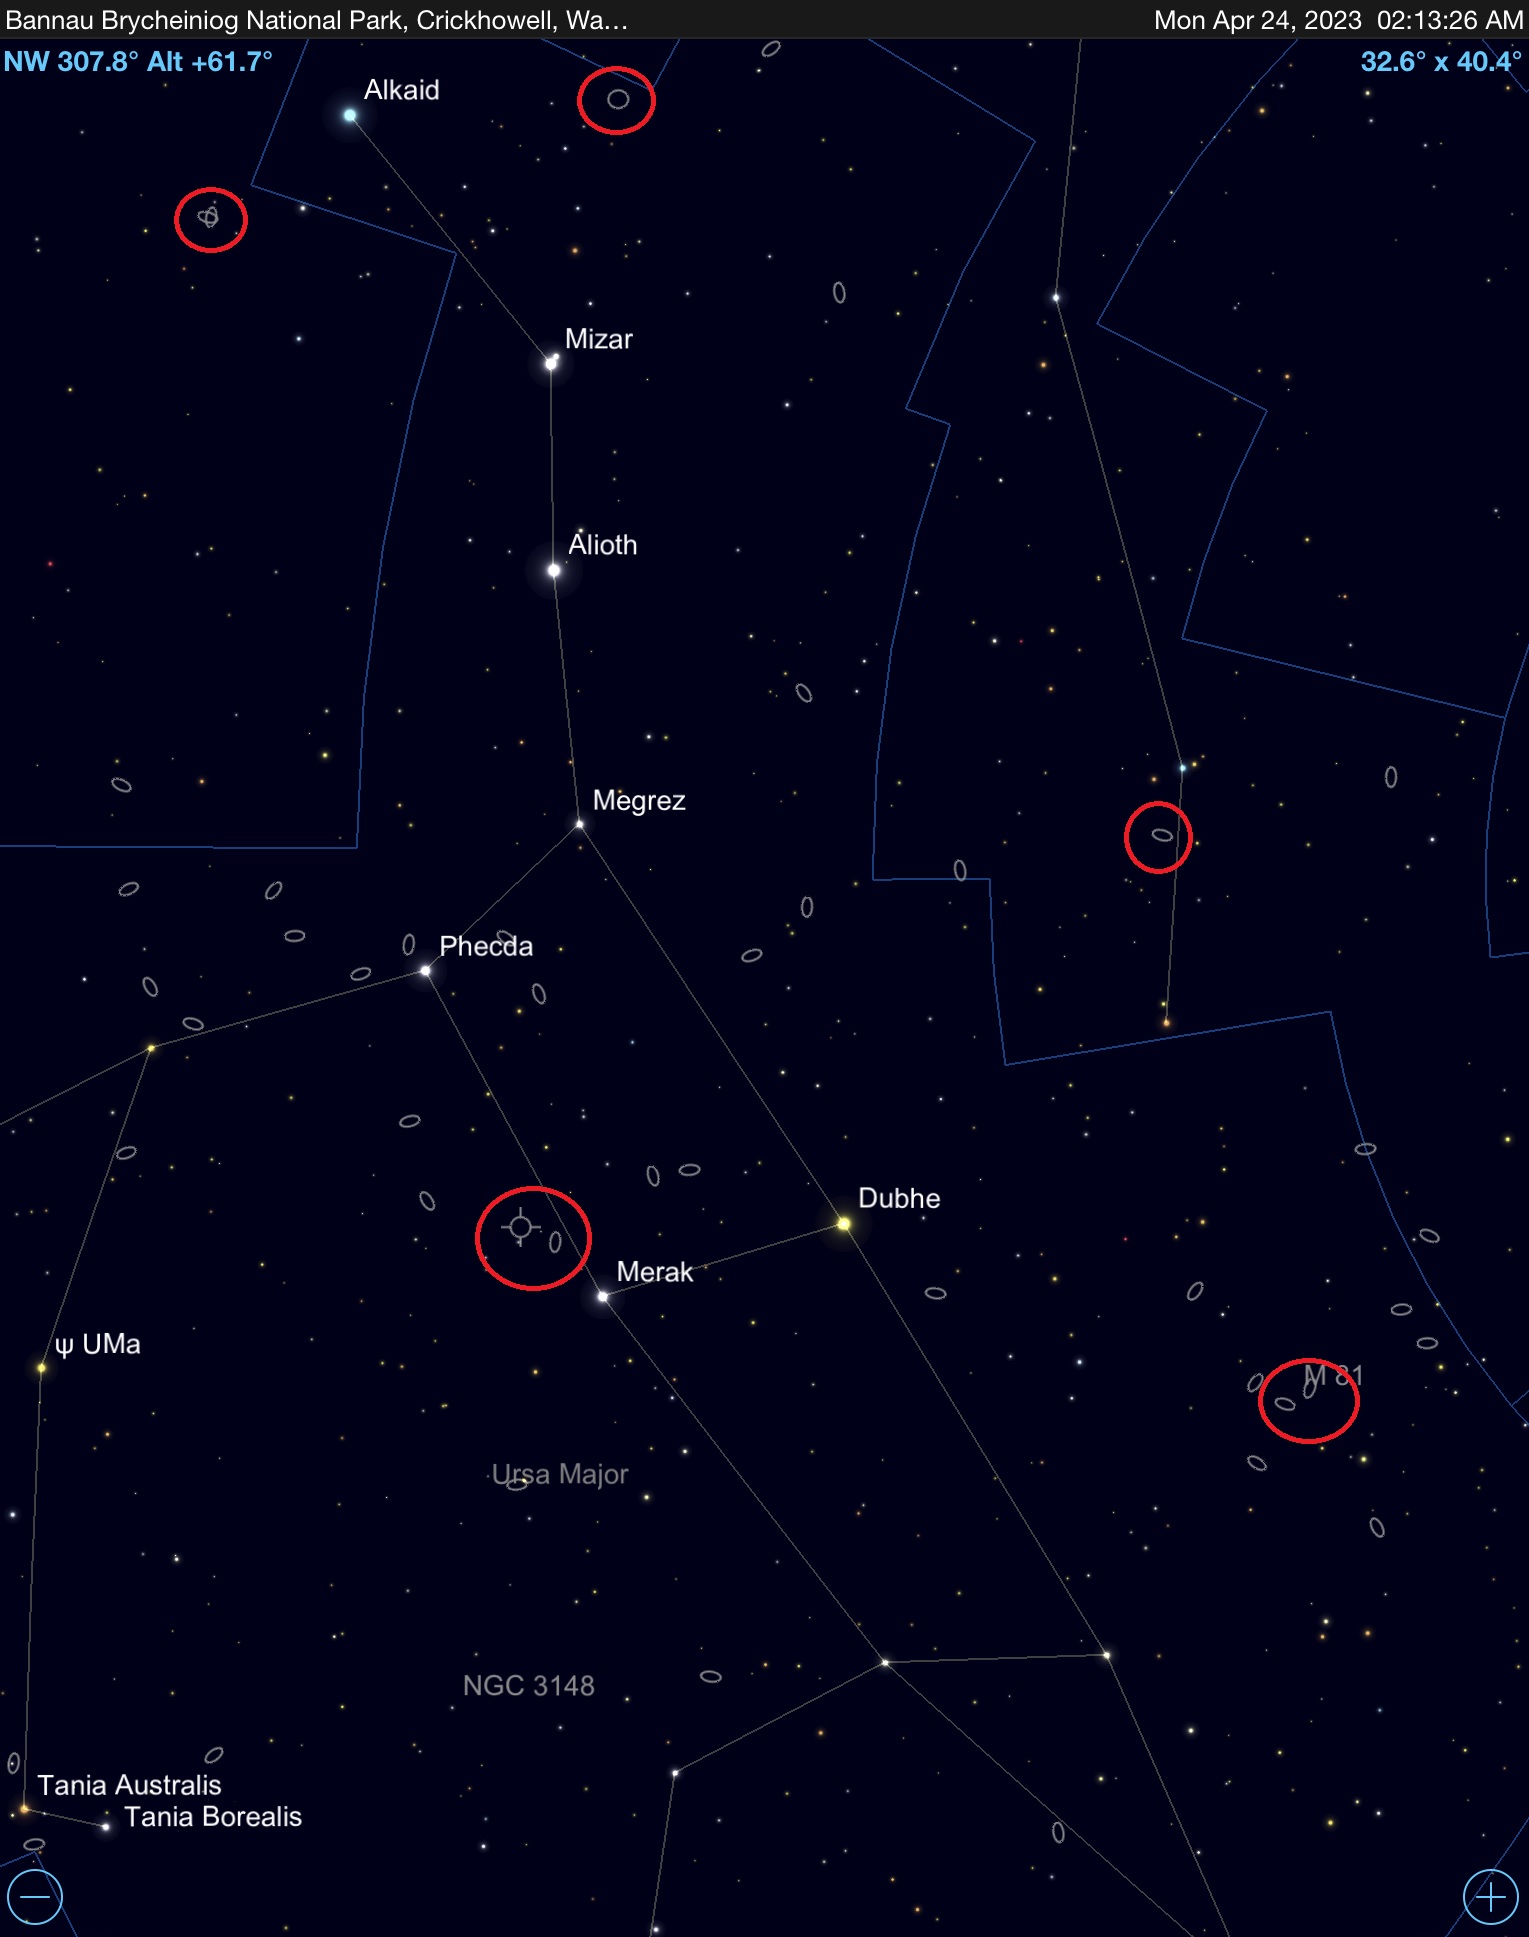 Star chart showing the location of several circumpolar targets